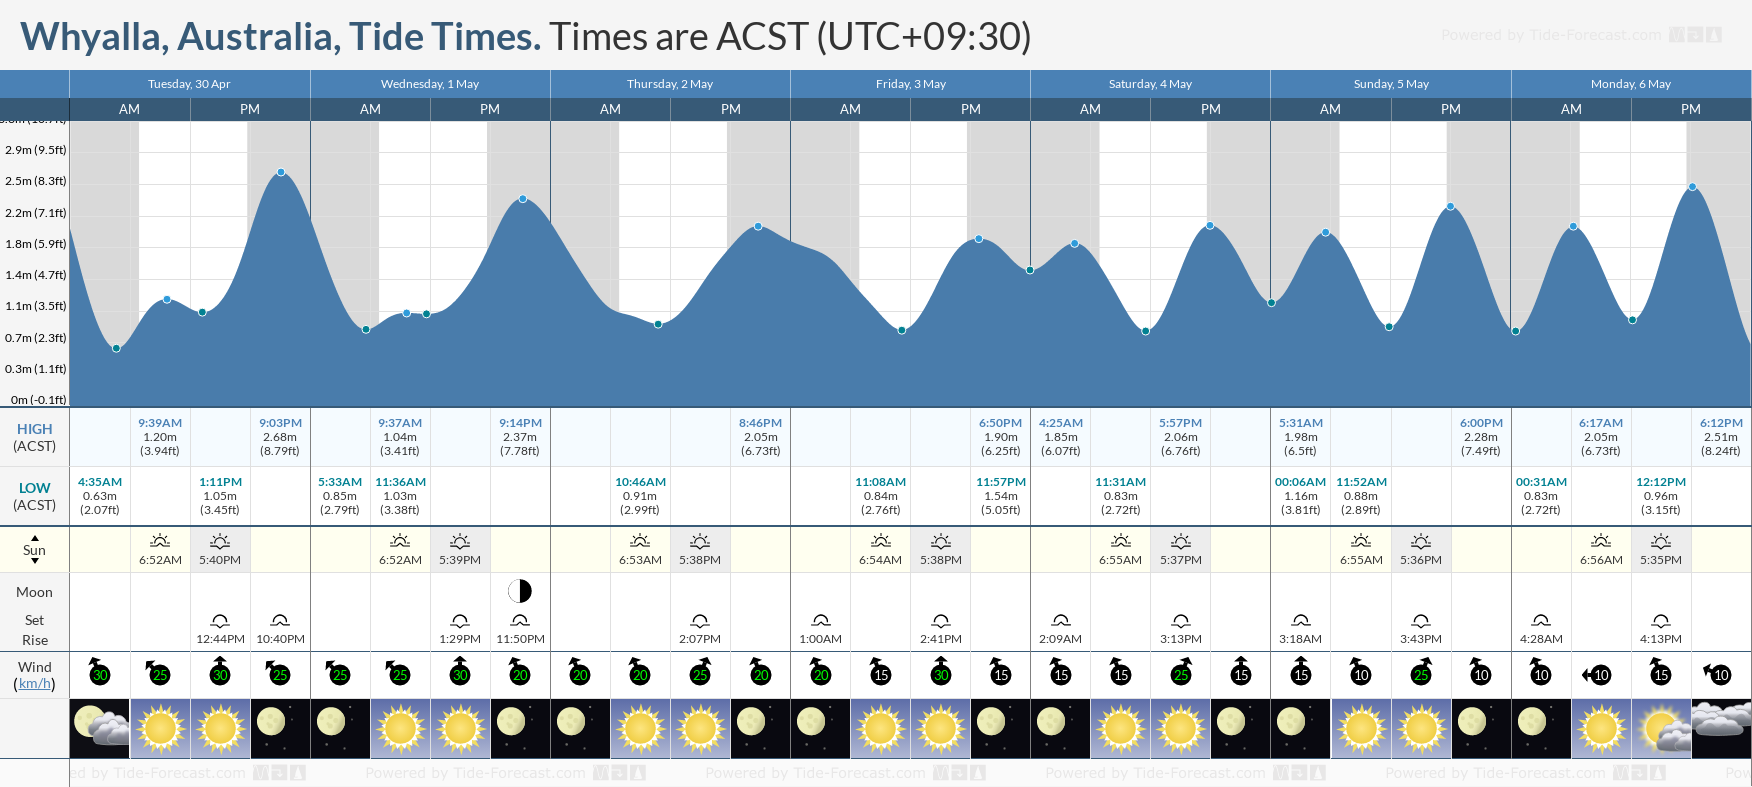 Whyalla, Australia Tide Chart including high and low tide tide times for the next 7 days